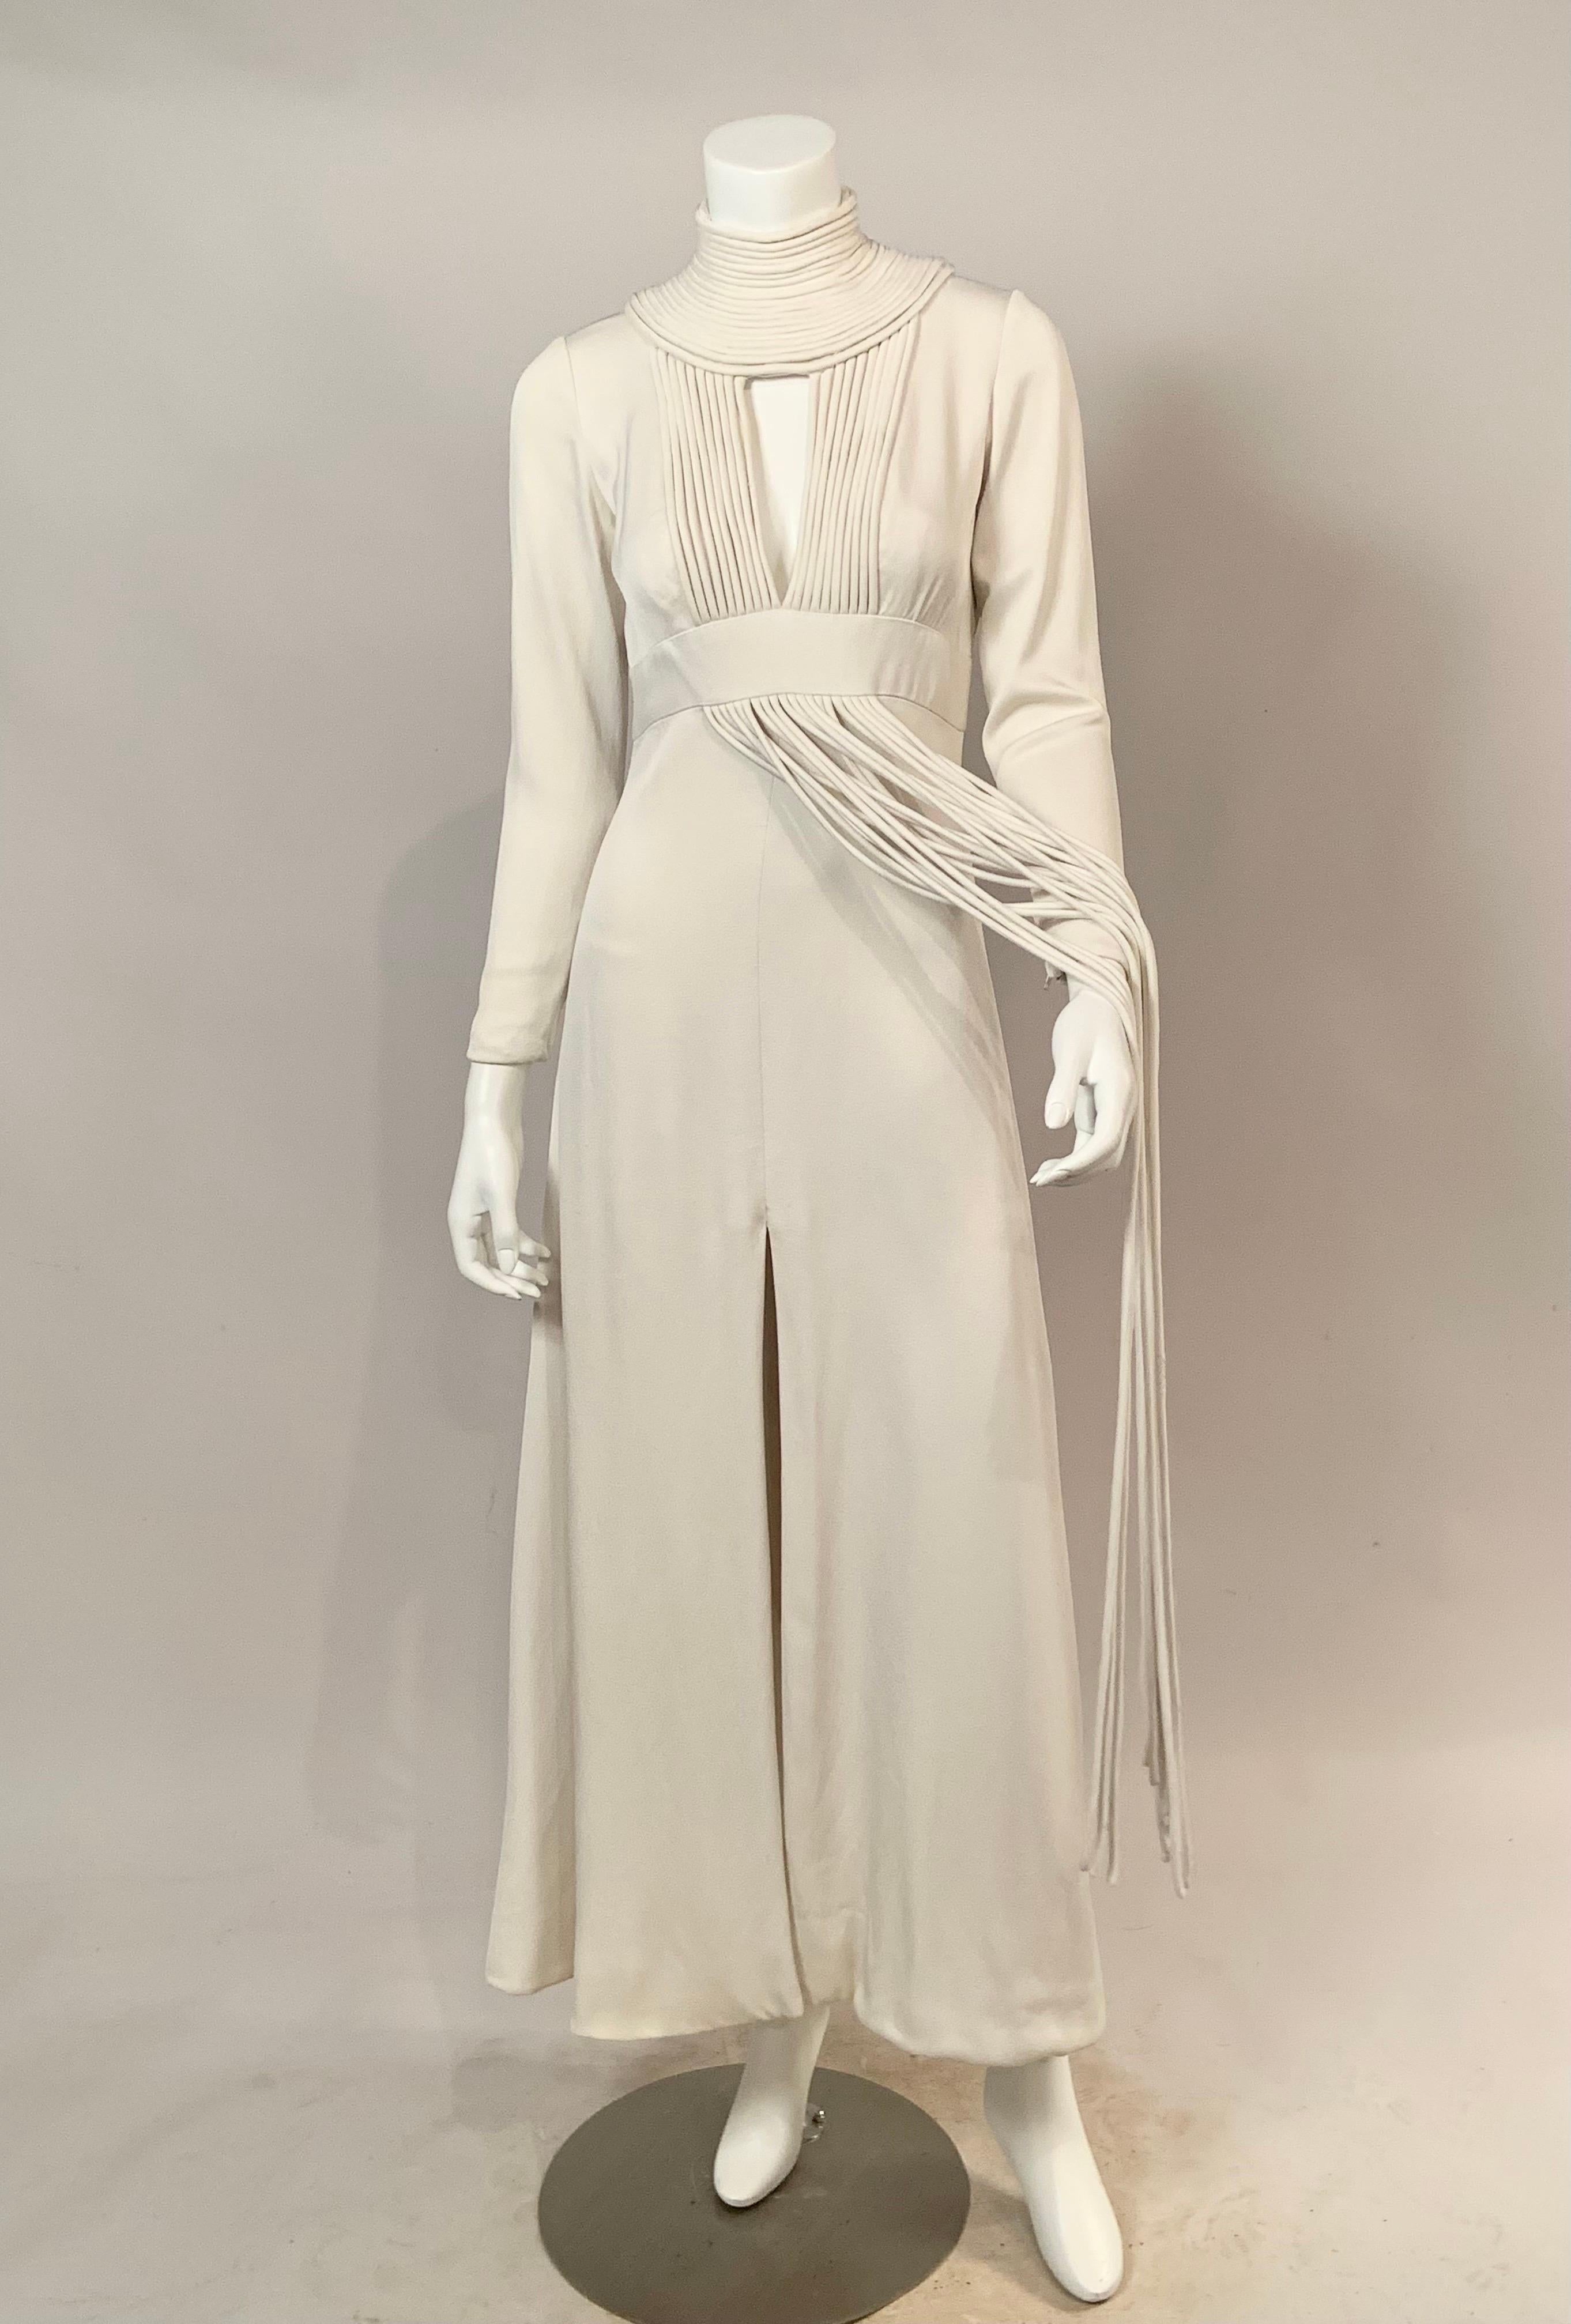 1970's Travilla White Silk Crepe Gown with Unusual Cord Decoration  For Sale 1